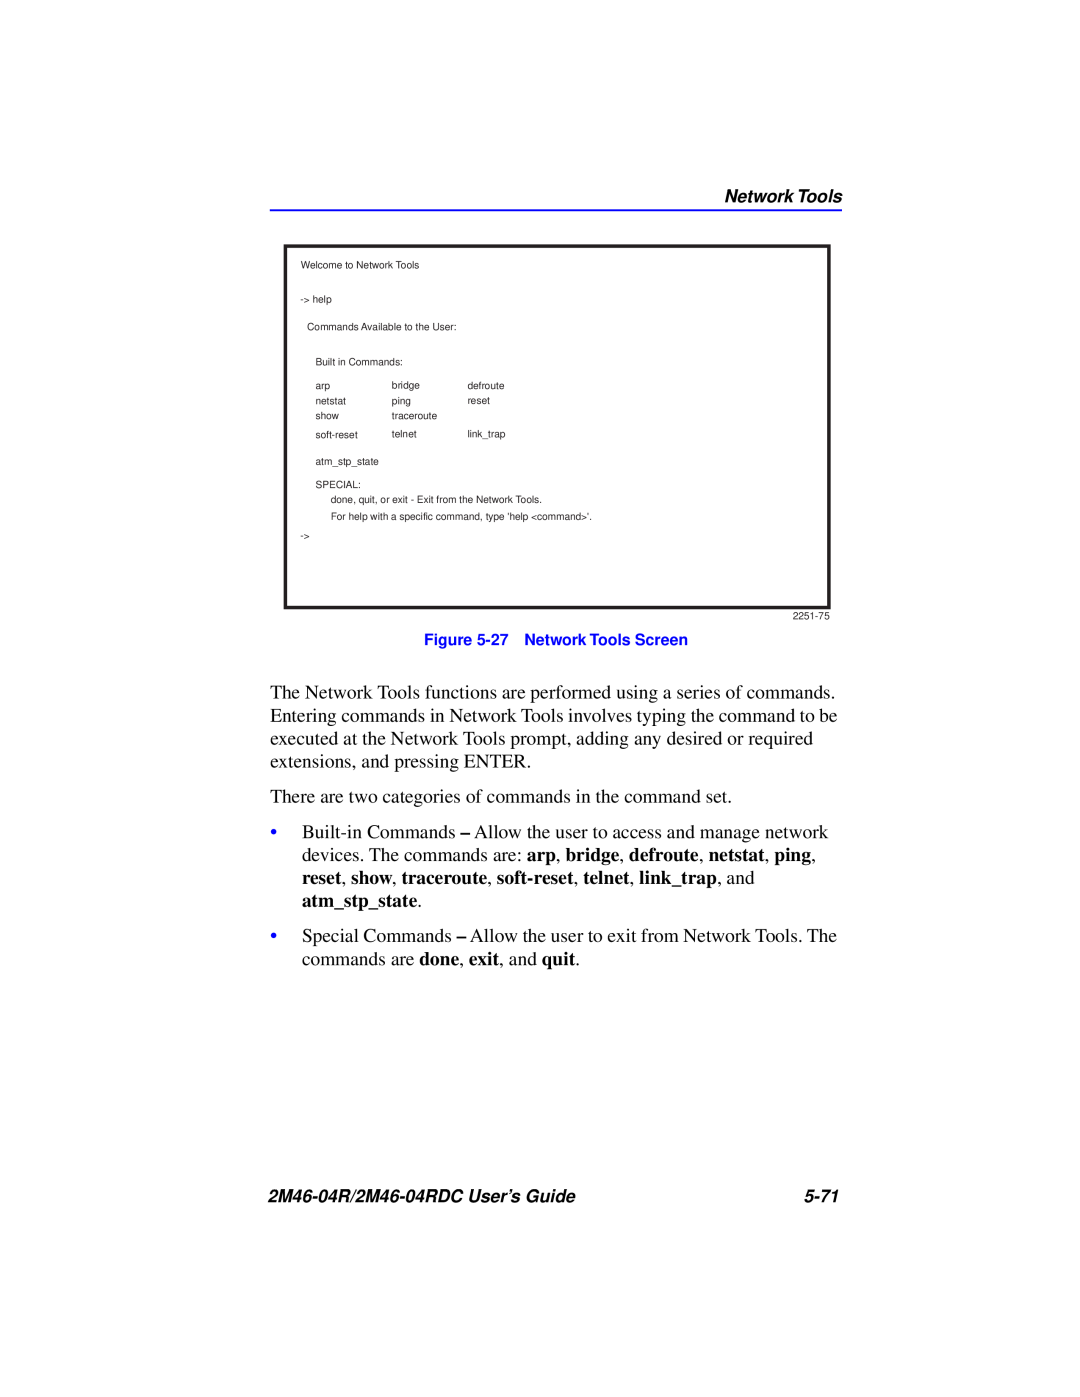 Cabletron Systems pmn manual There are two categories of commands in the command set 